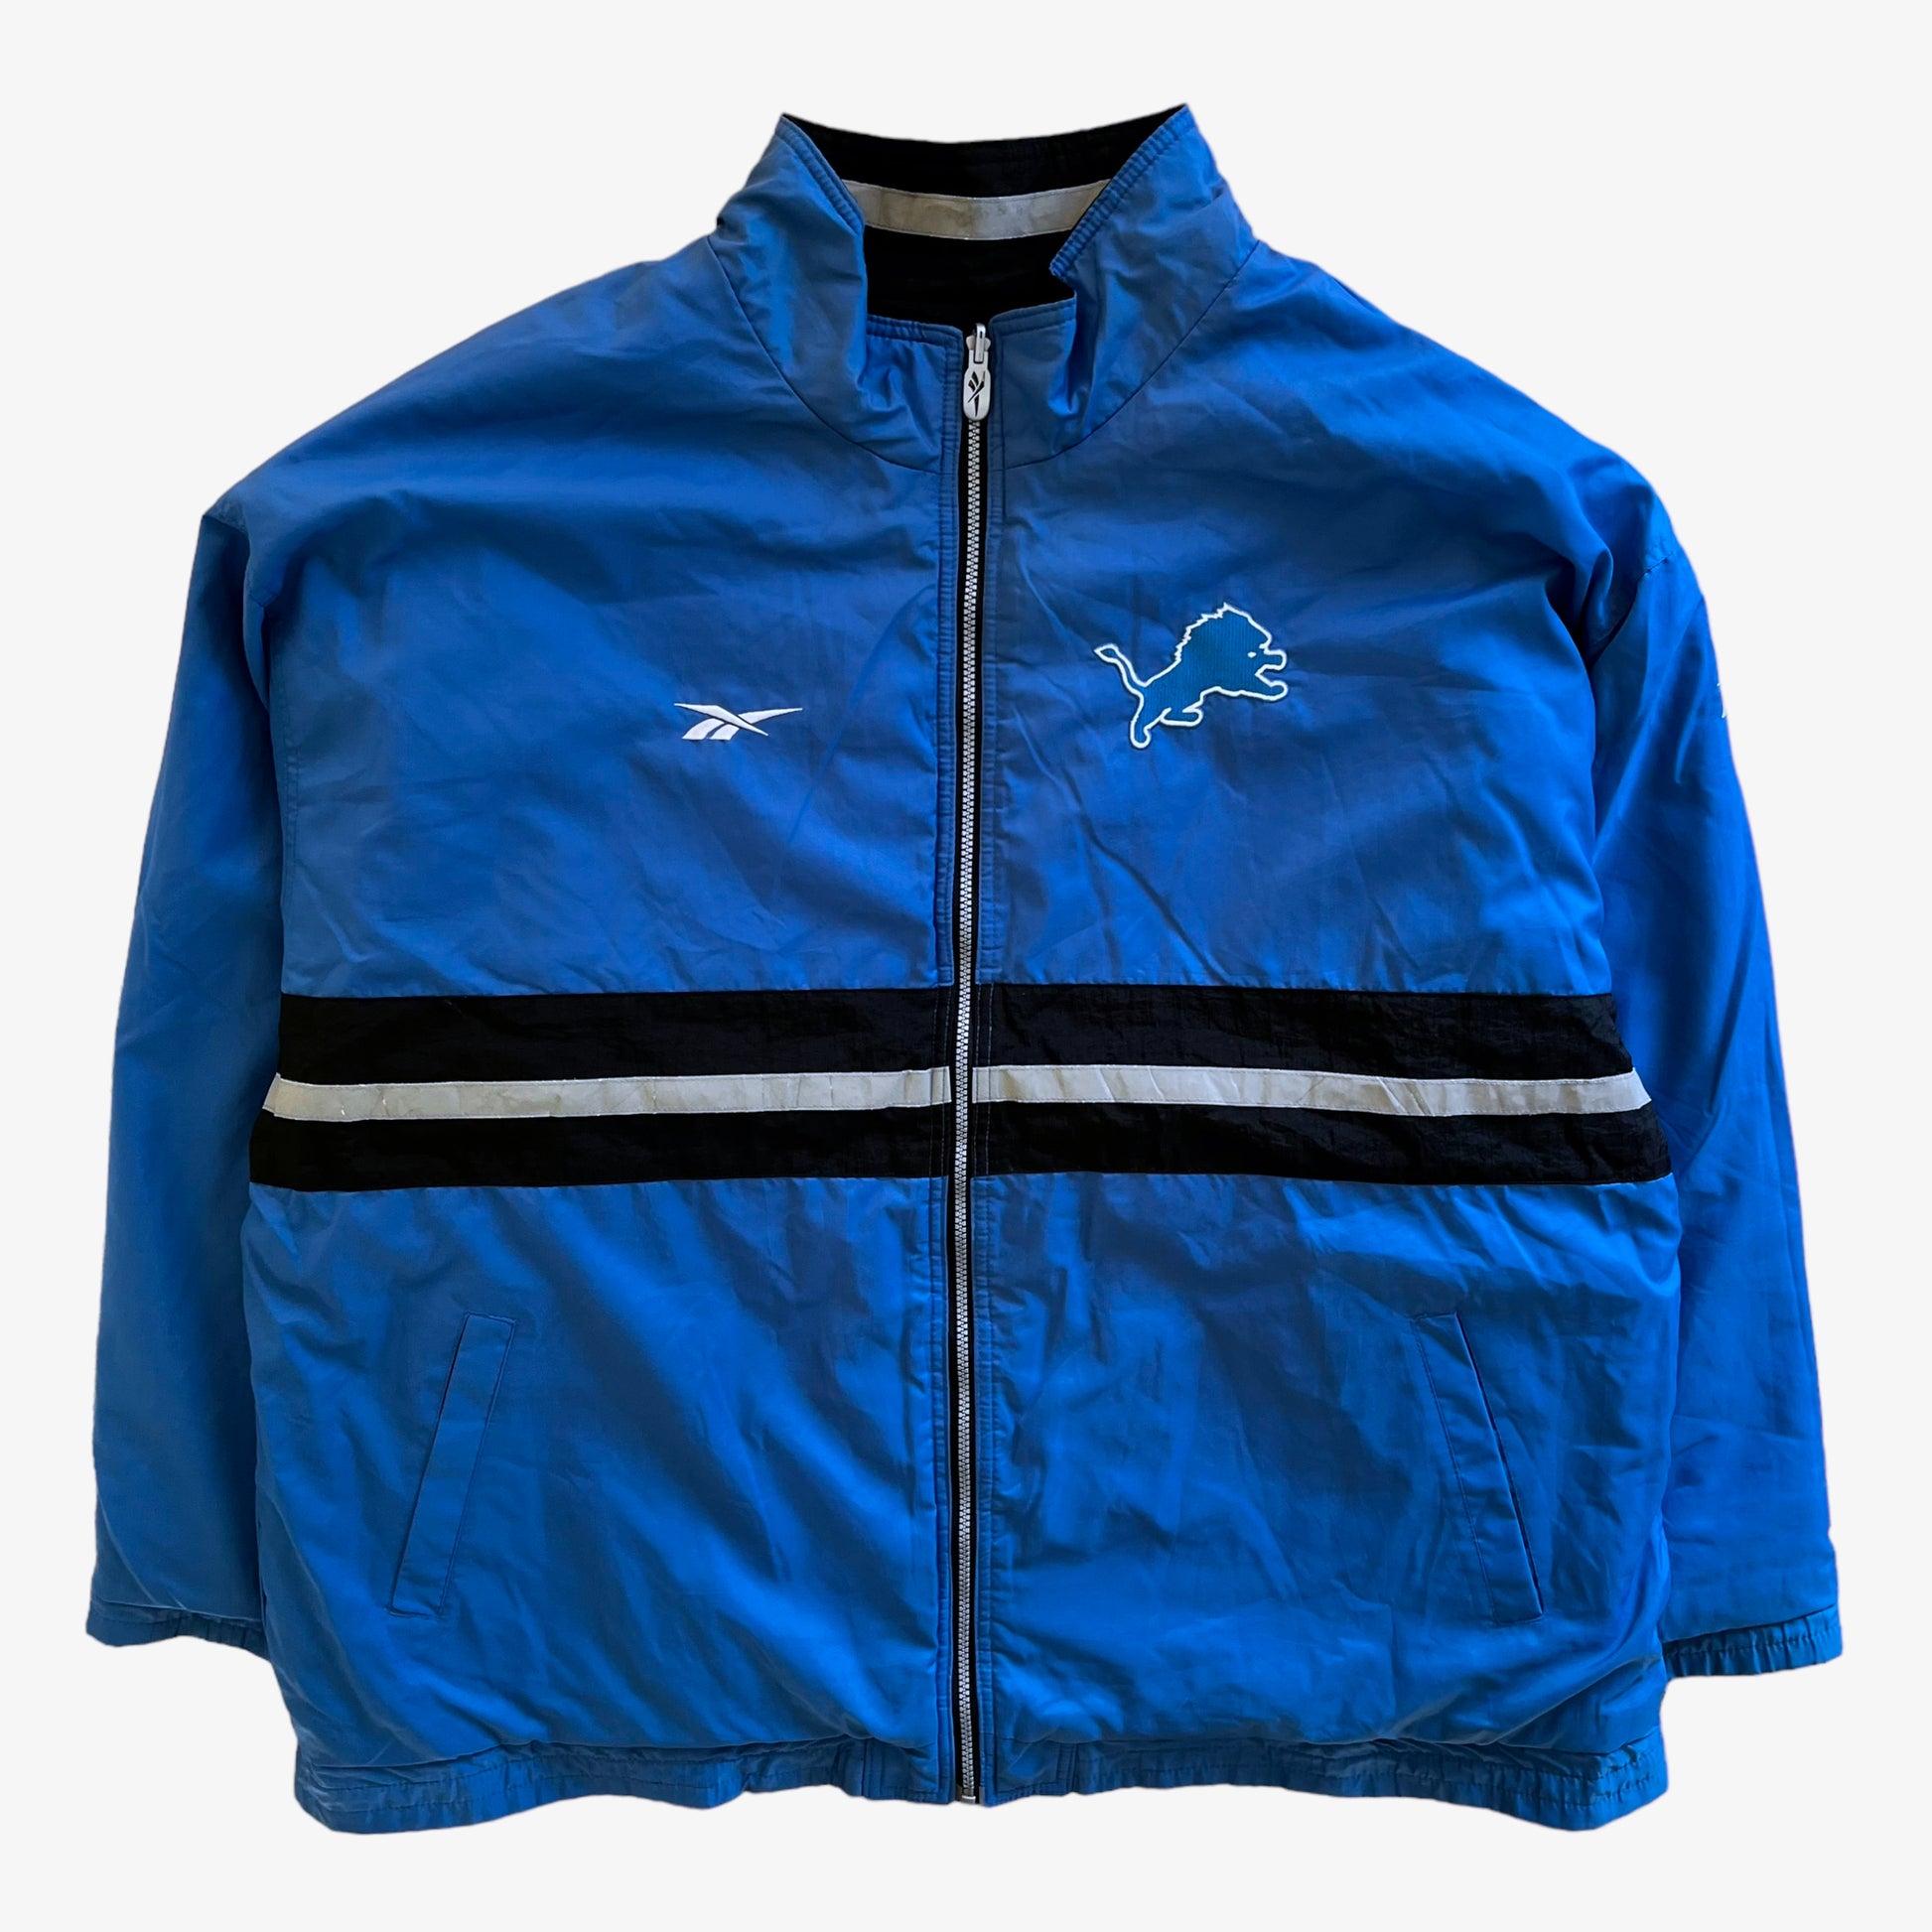 Vintage 90s Reebok NFL Pro Line Detroit Lions Reversible Jacket With Back Spell Out Reversed - Casspios Dream